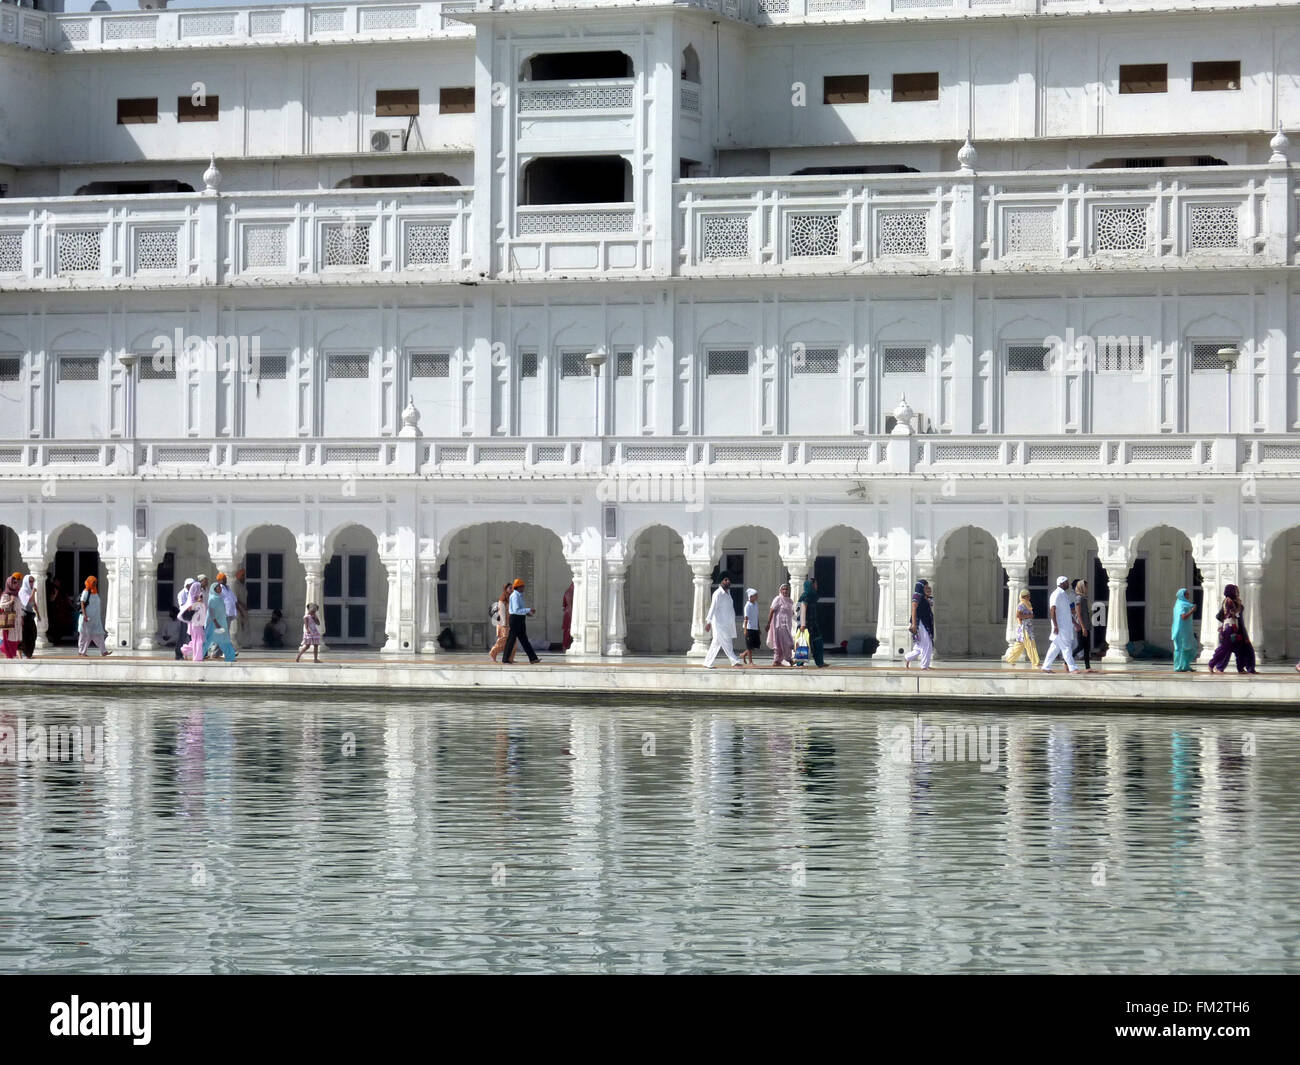 Building complex, Golden Temple, Amritsar, Punjab, India, around Amrit Sarovar, the white building with facilities for pilgrims Stock Photo